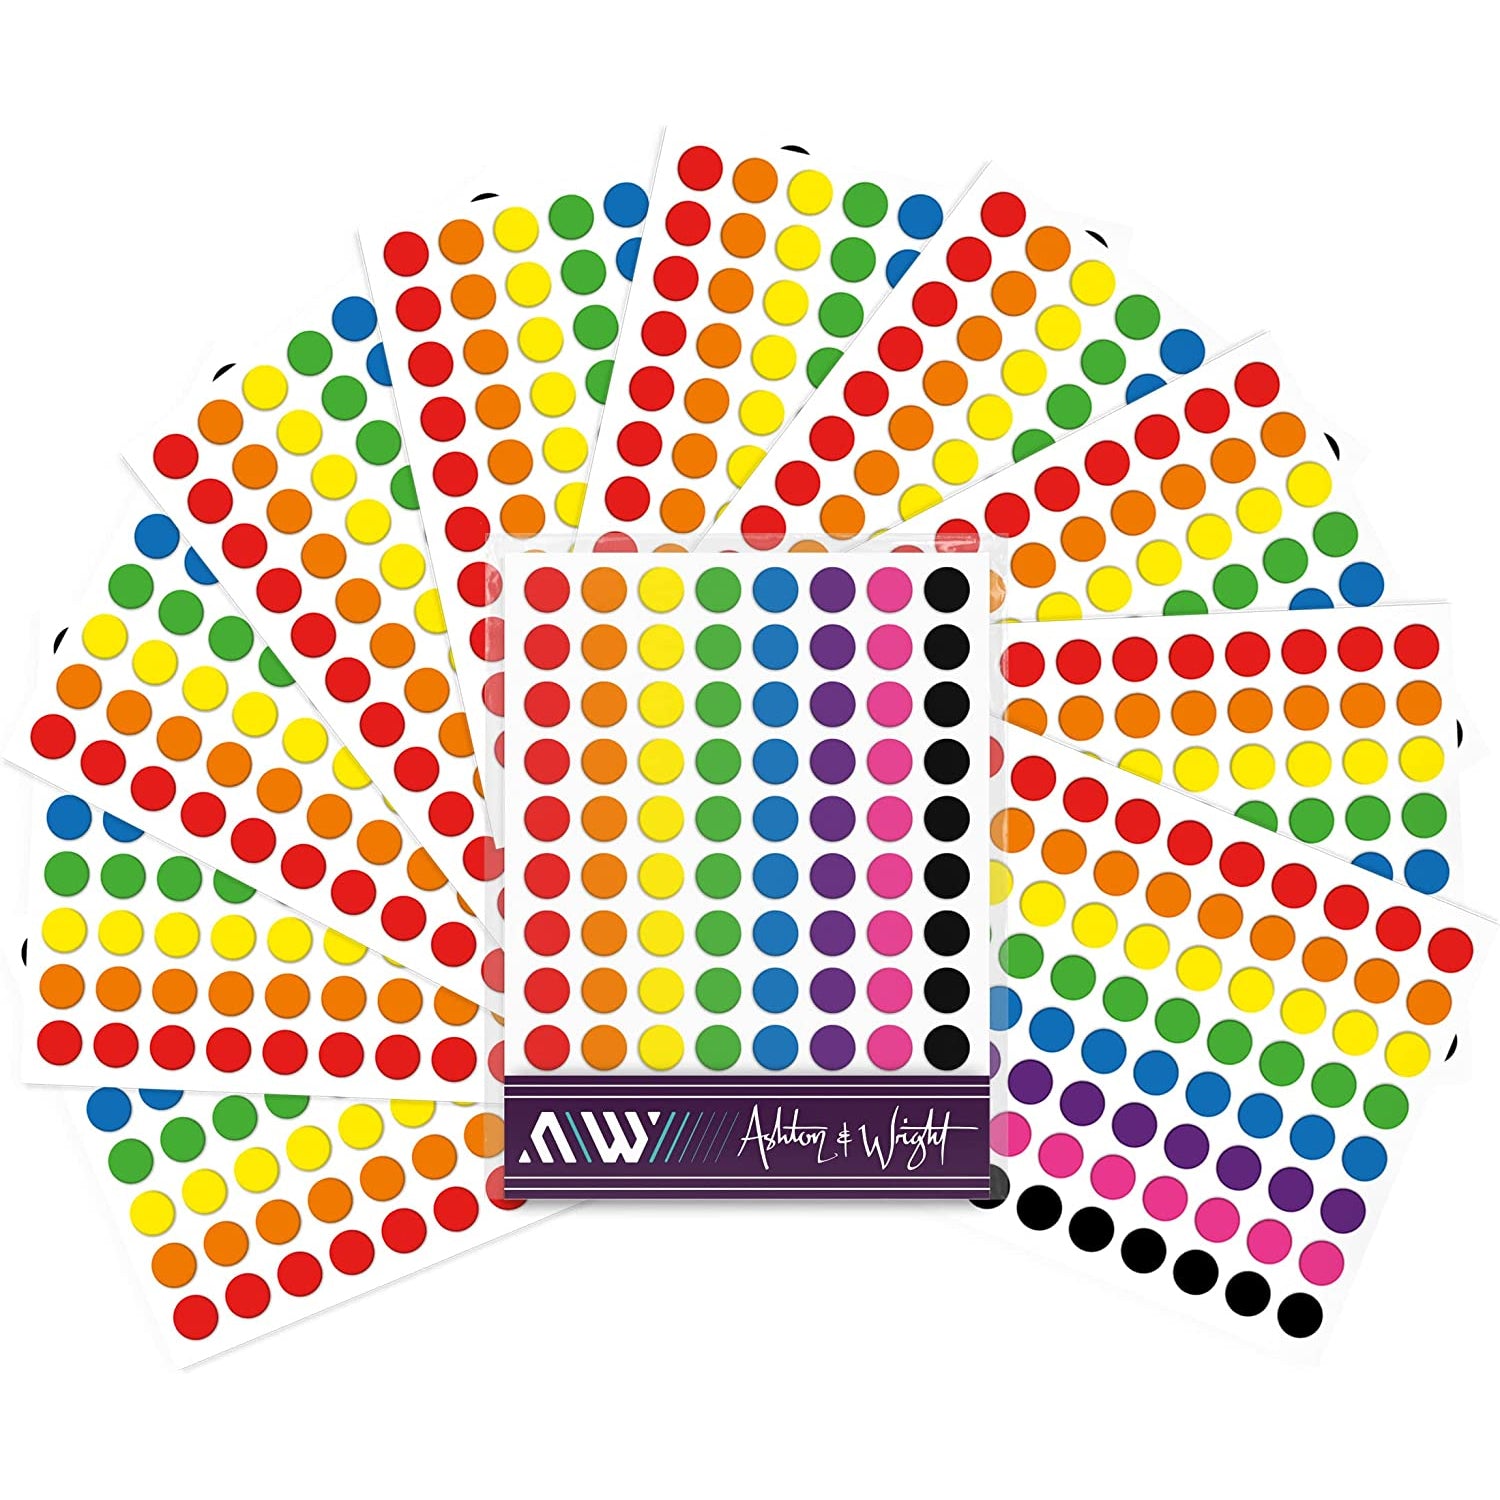 Ashton and Wright - AZ Alphabetical Letter Stickers - 260 Easy Peel Labels  - 8 x 8mm